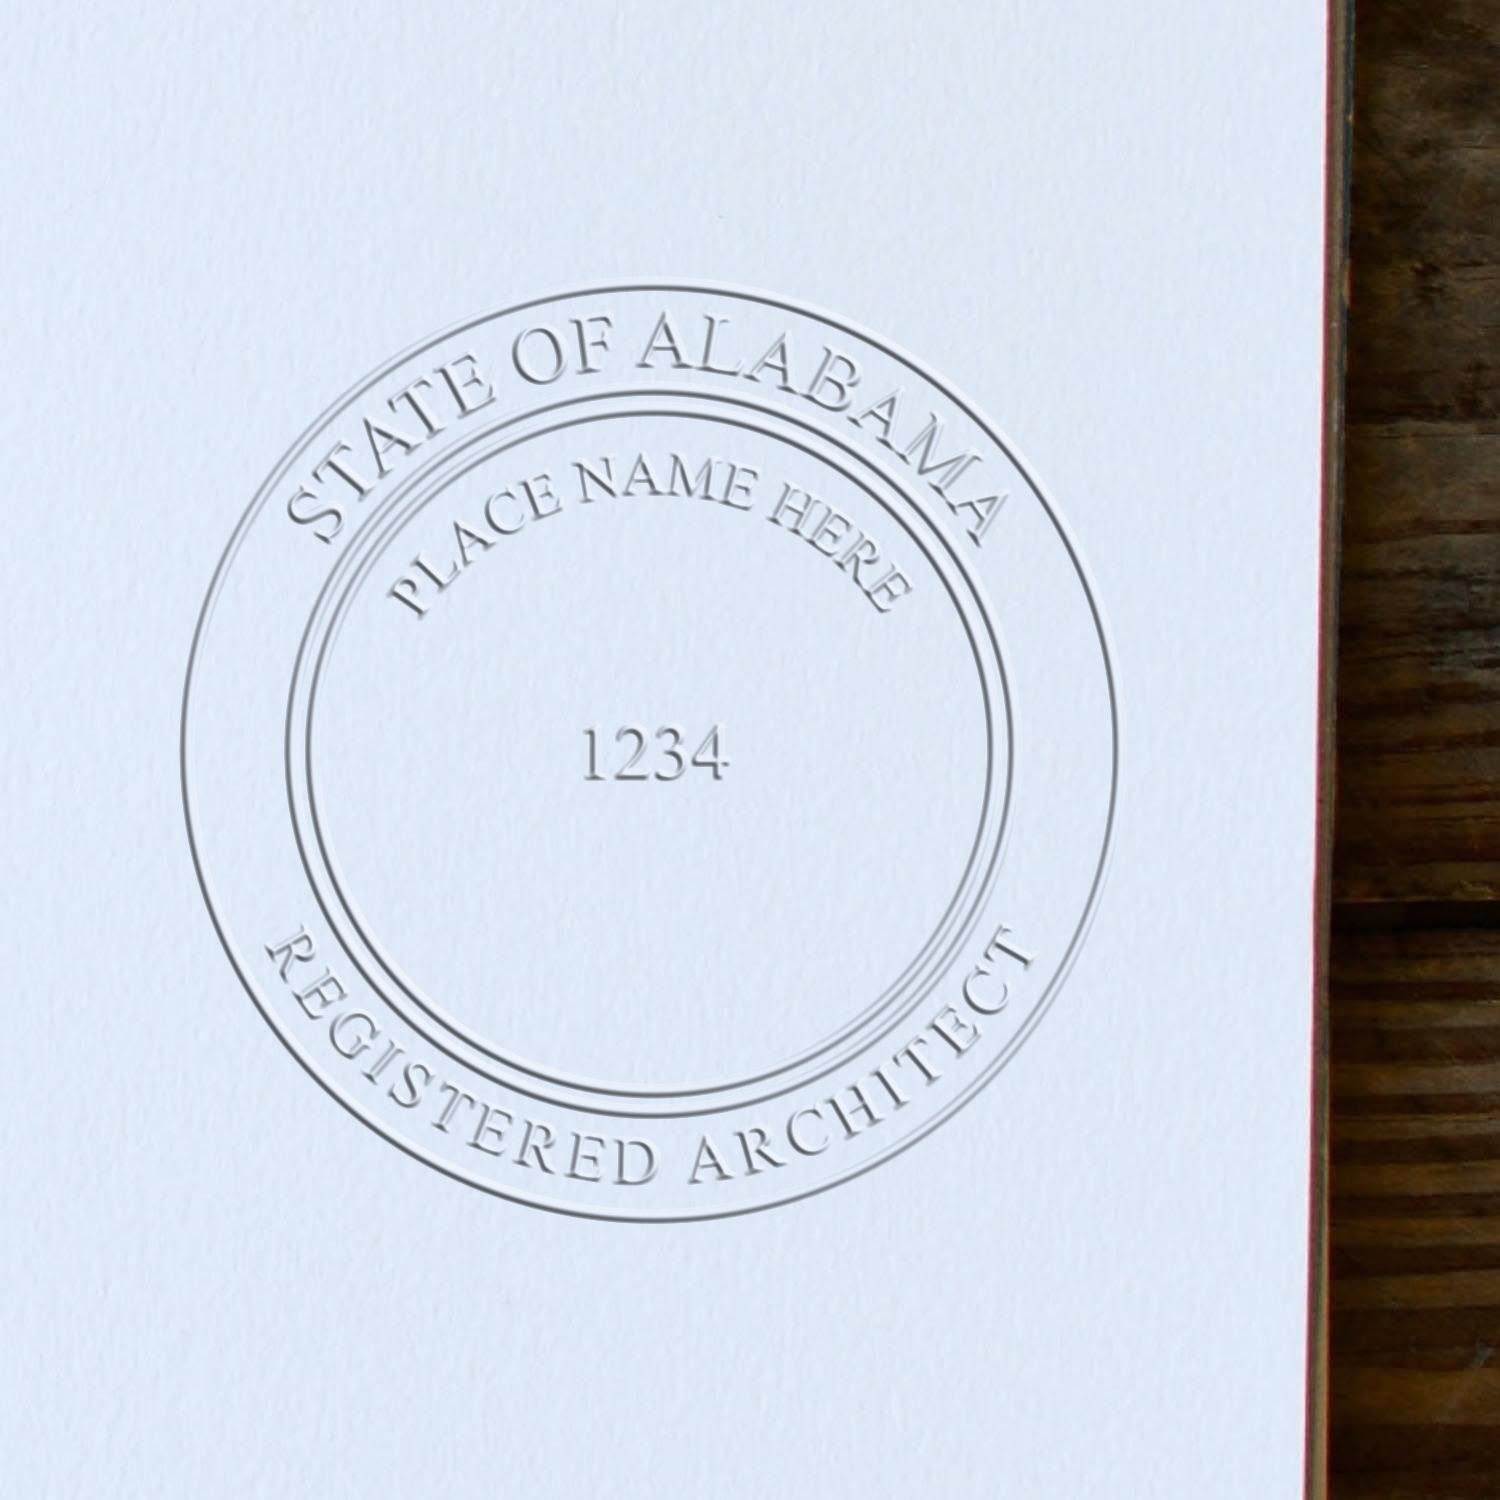 The Gift Alabama Architect Seal stamp impression comes to life with a crisp, detailed image stamped on paper - showcasing true professional quality.